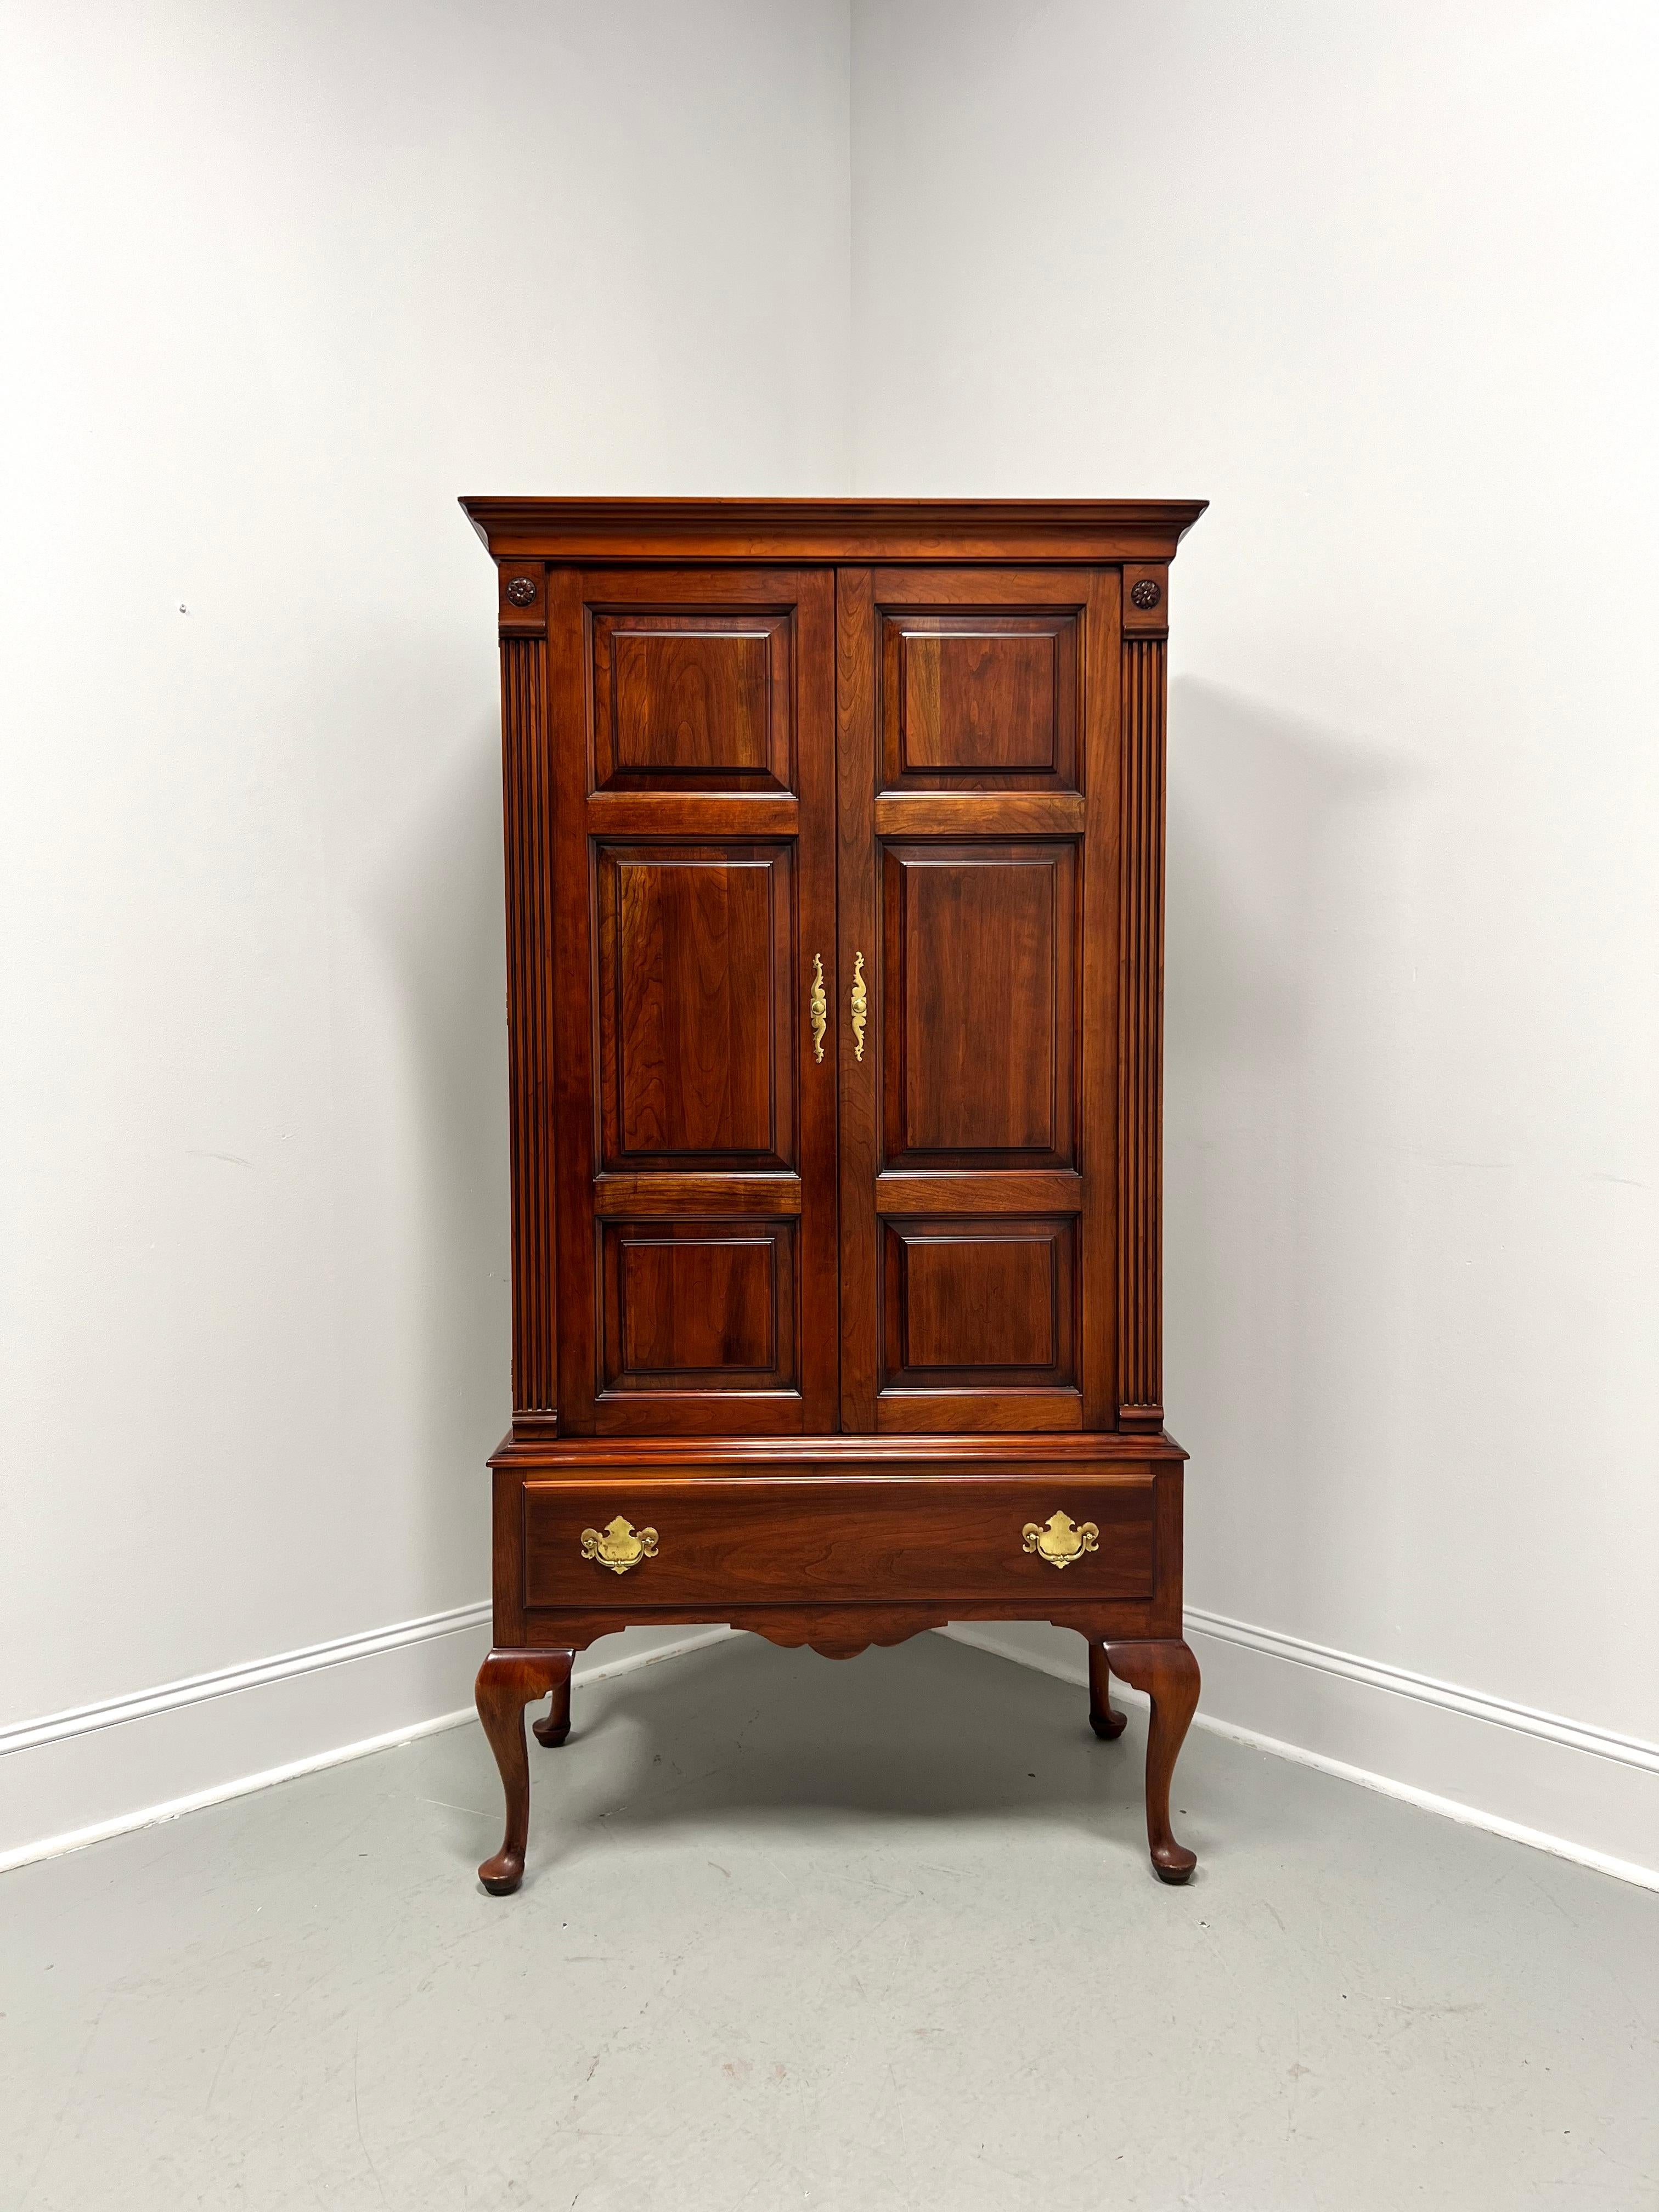 A Chippendale style gentleman's chest by Statton Furniture, from their Trutype Americana line. Solid cherry wood with their Centennial finish, brass hardware, crown molding at the top, fluted column-like front side corners, panel doors, carved